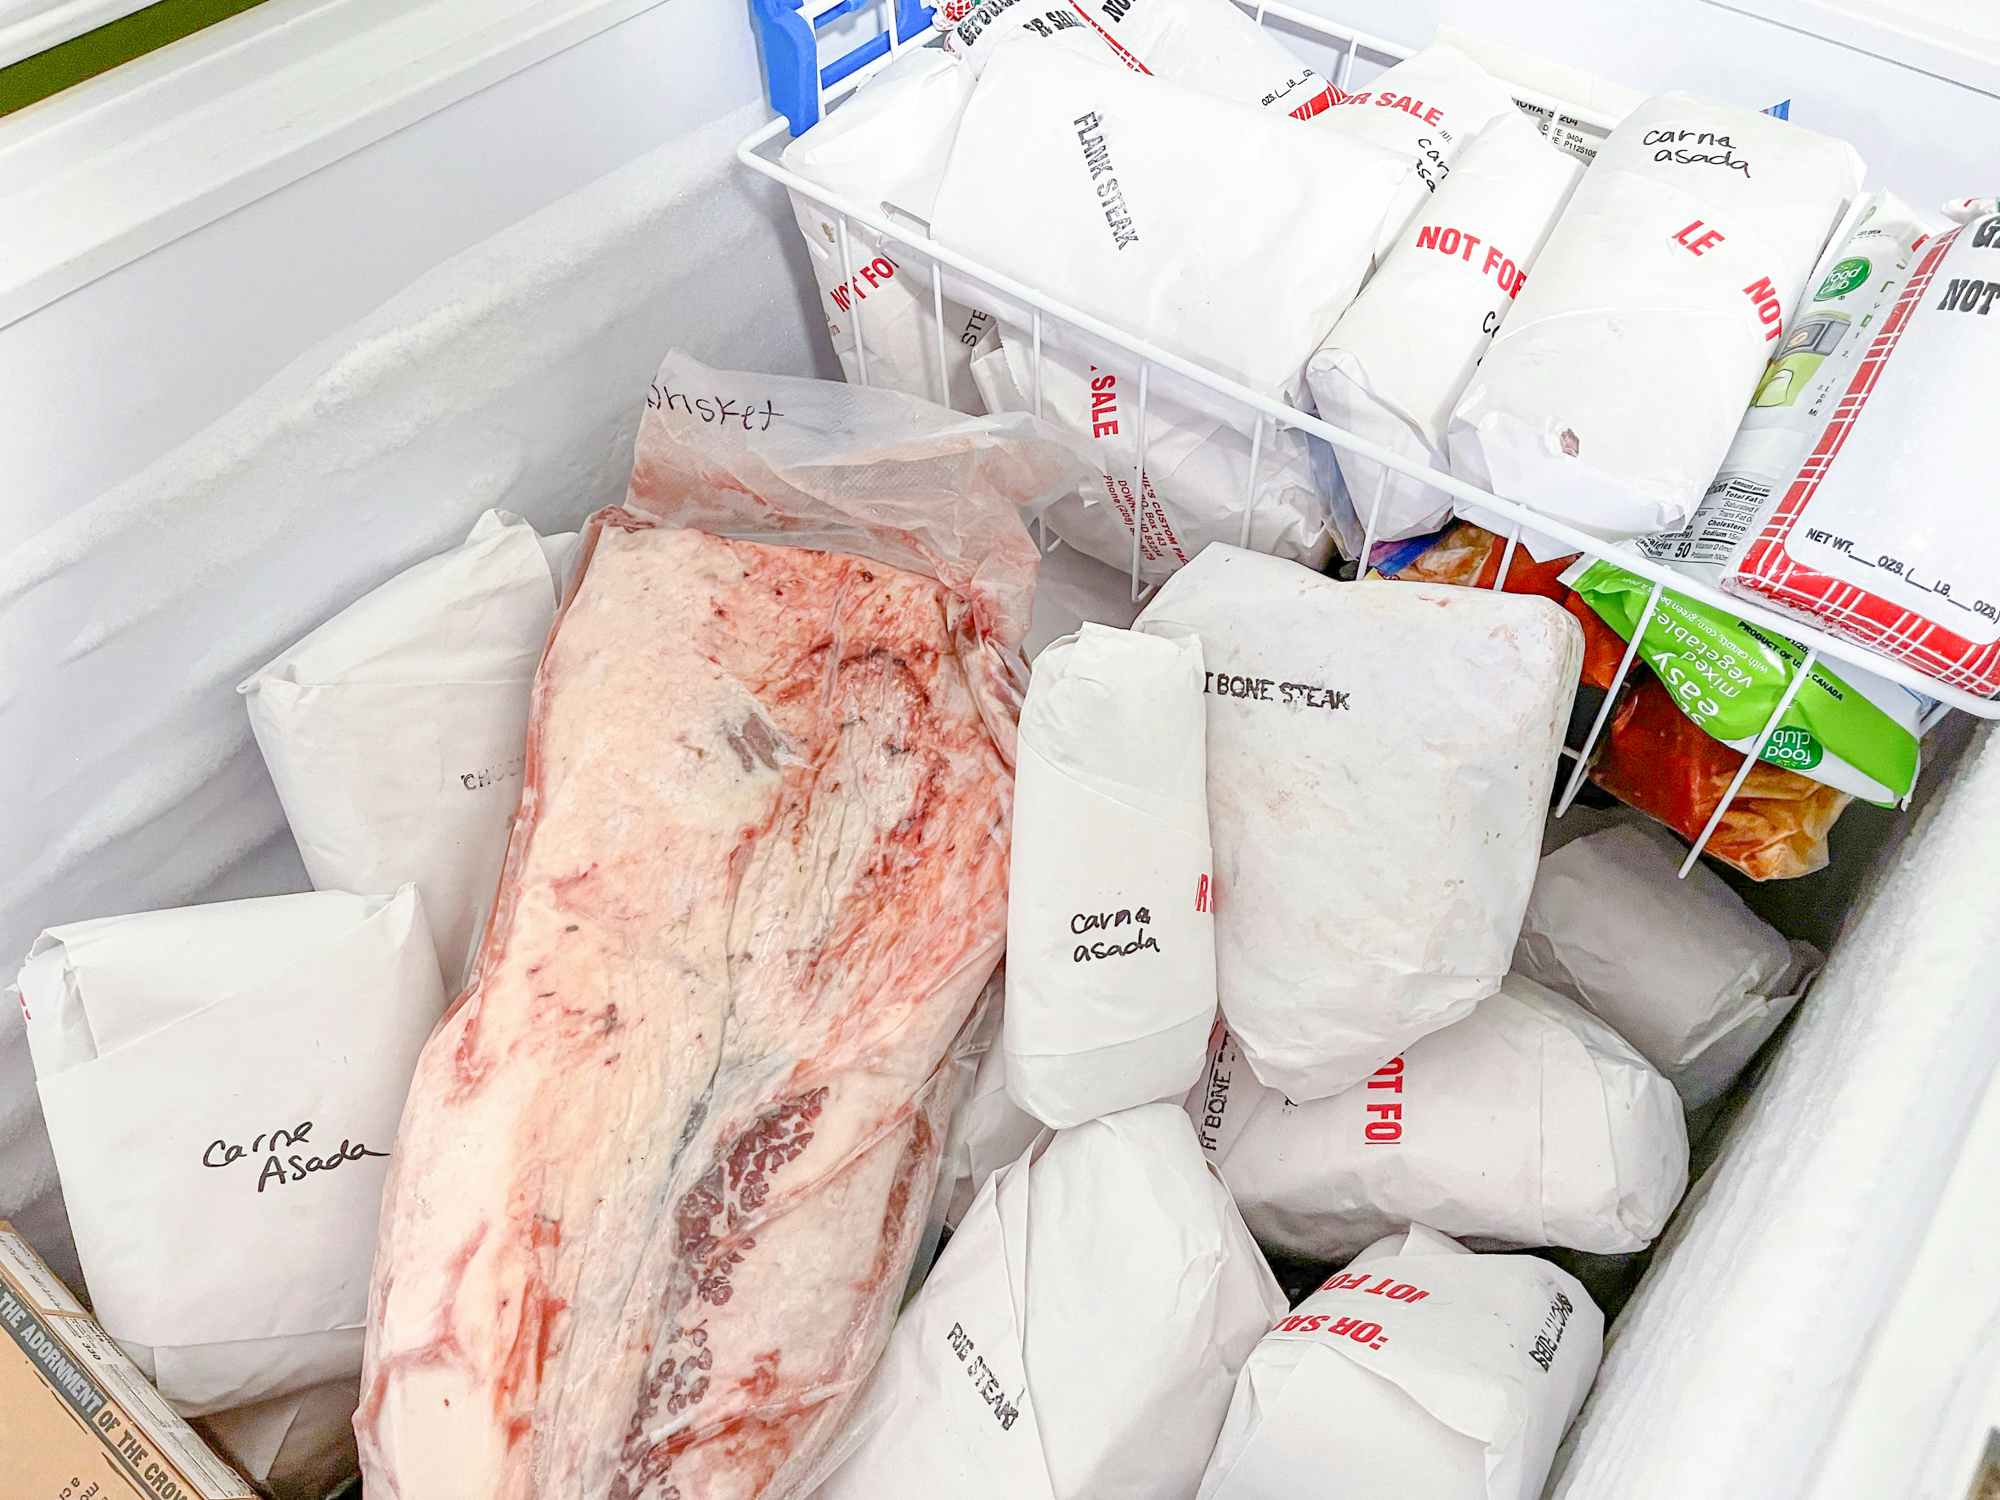 A freezer filled with steaks and beef from a cow.